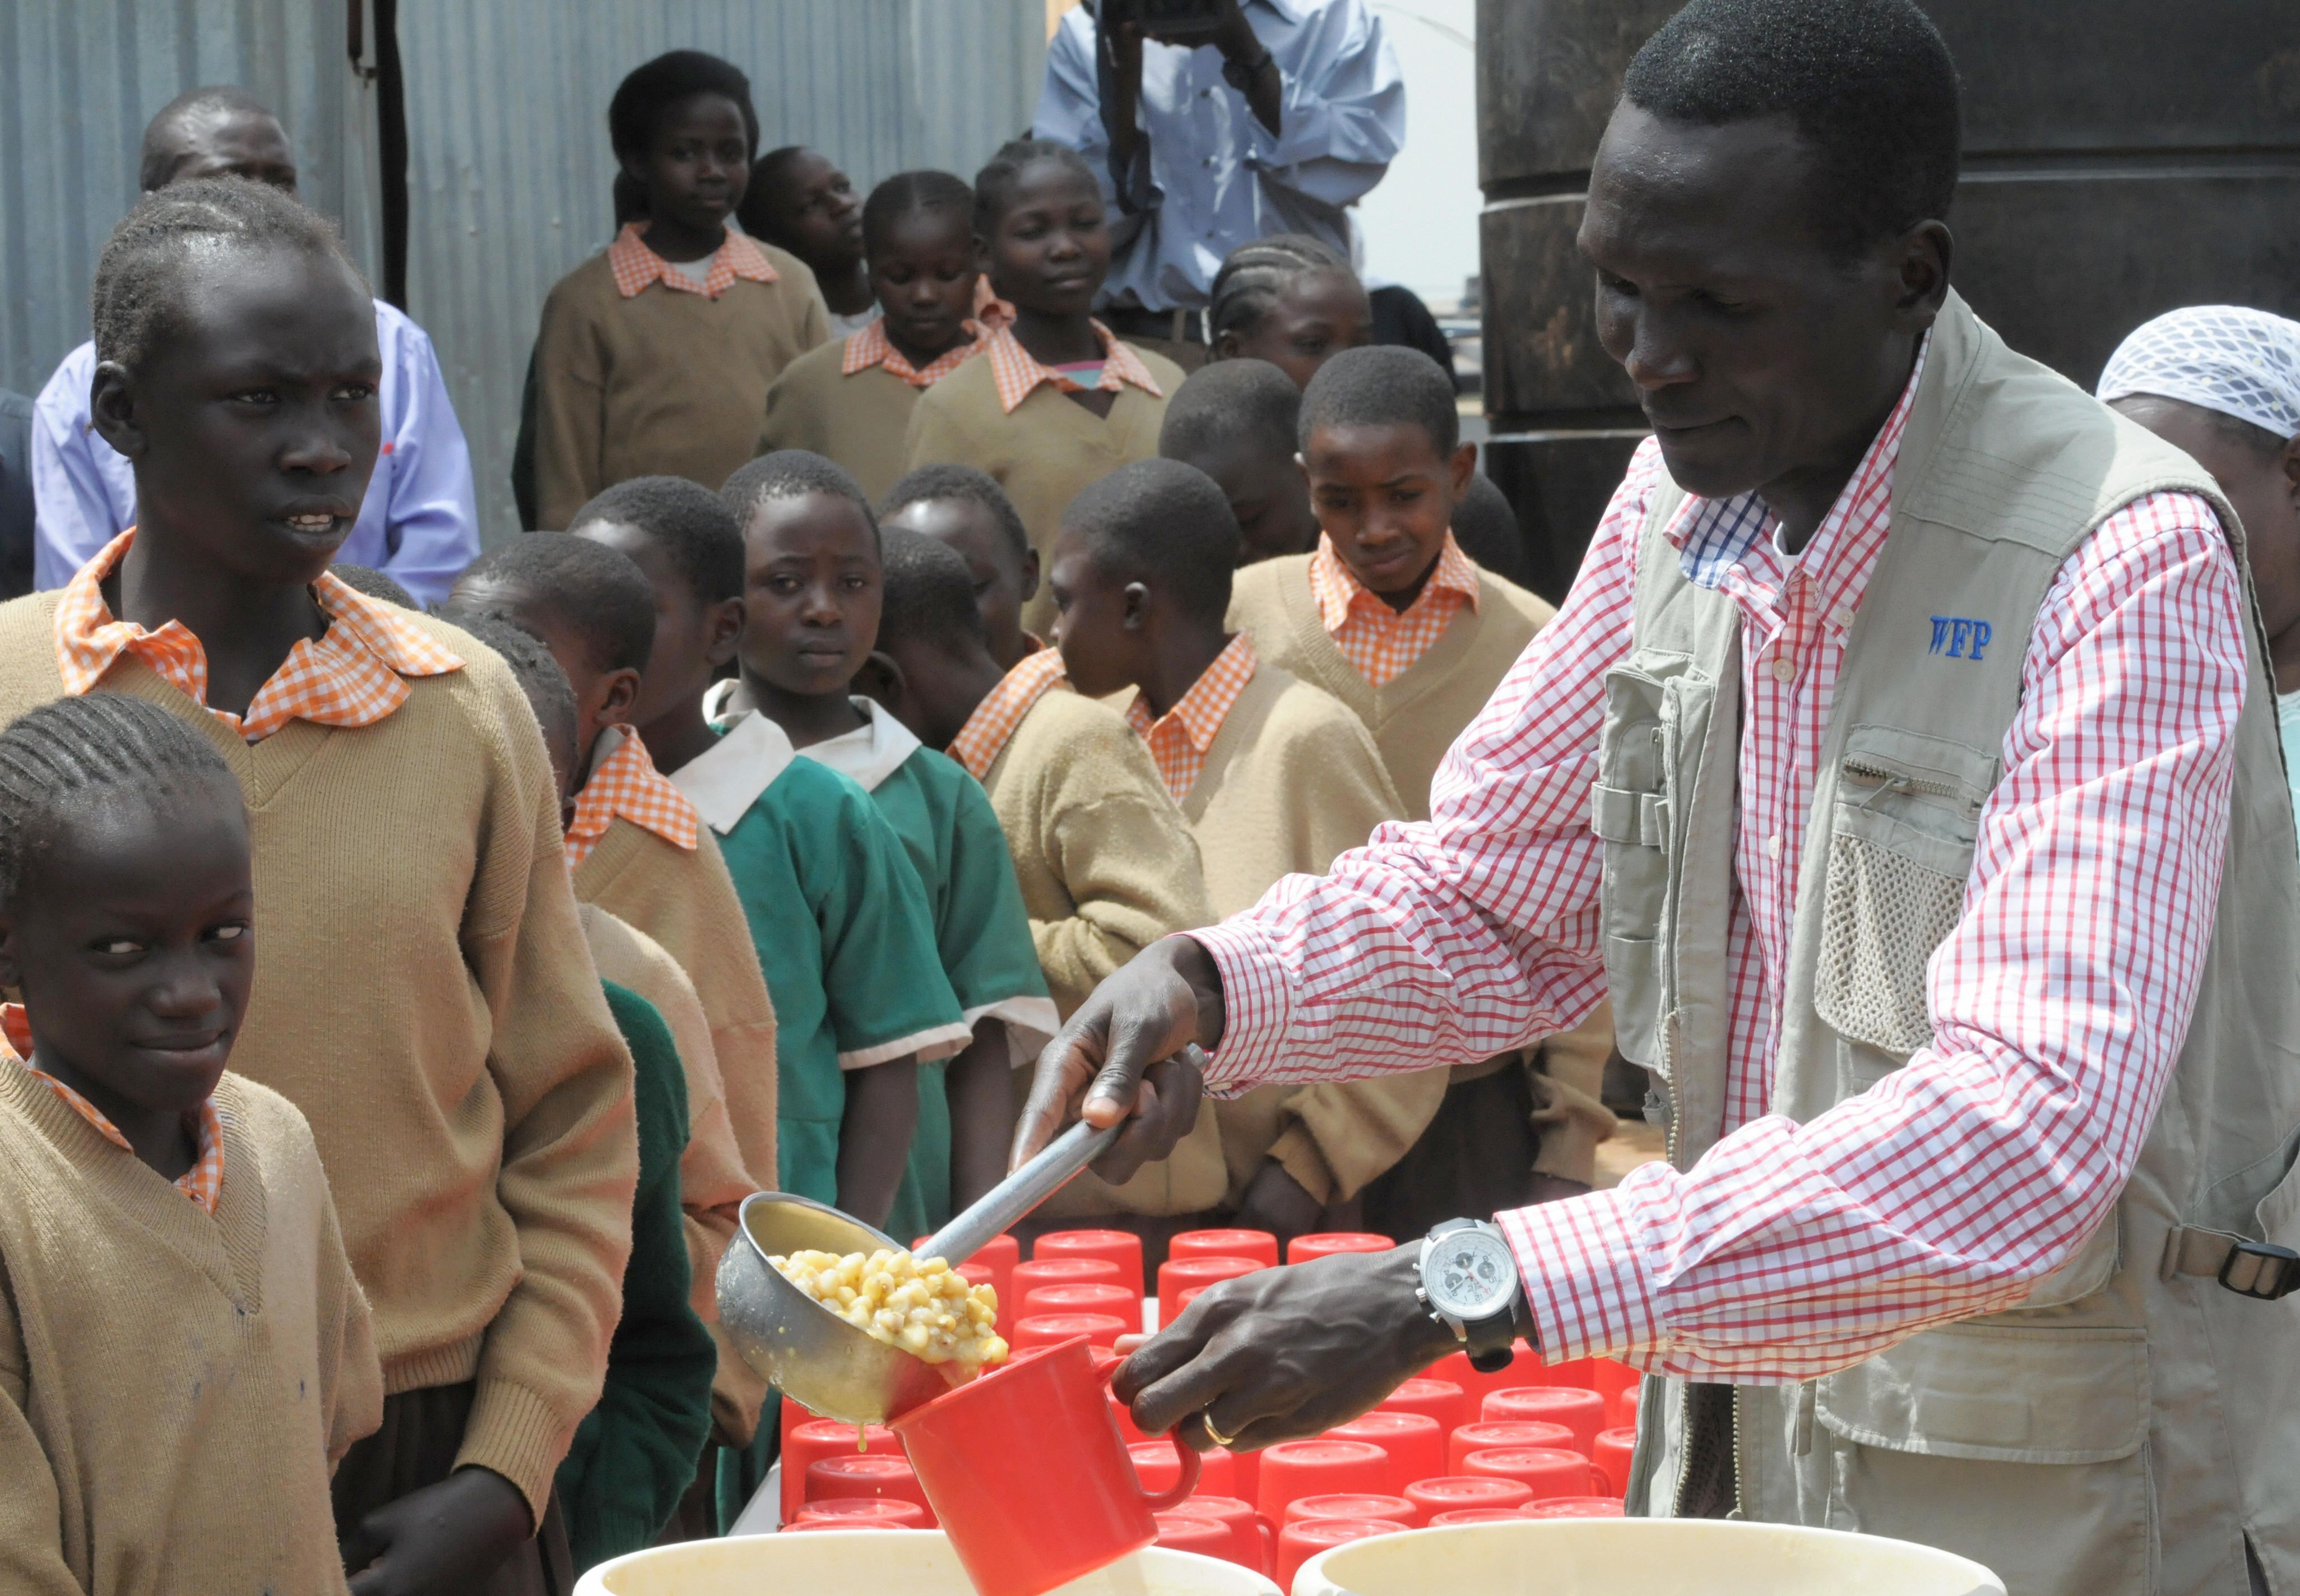 Paul Tergat in his role as ambassador for the World Food Programme